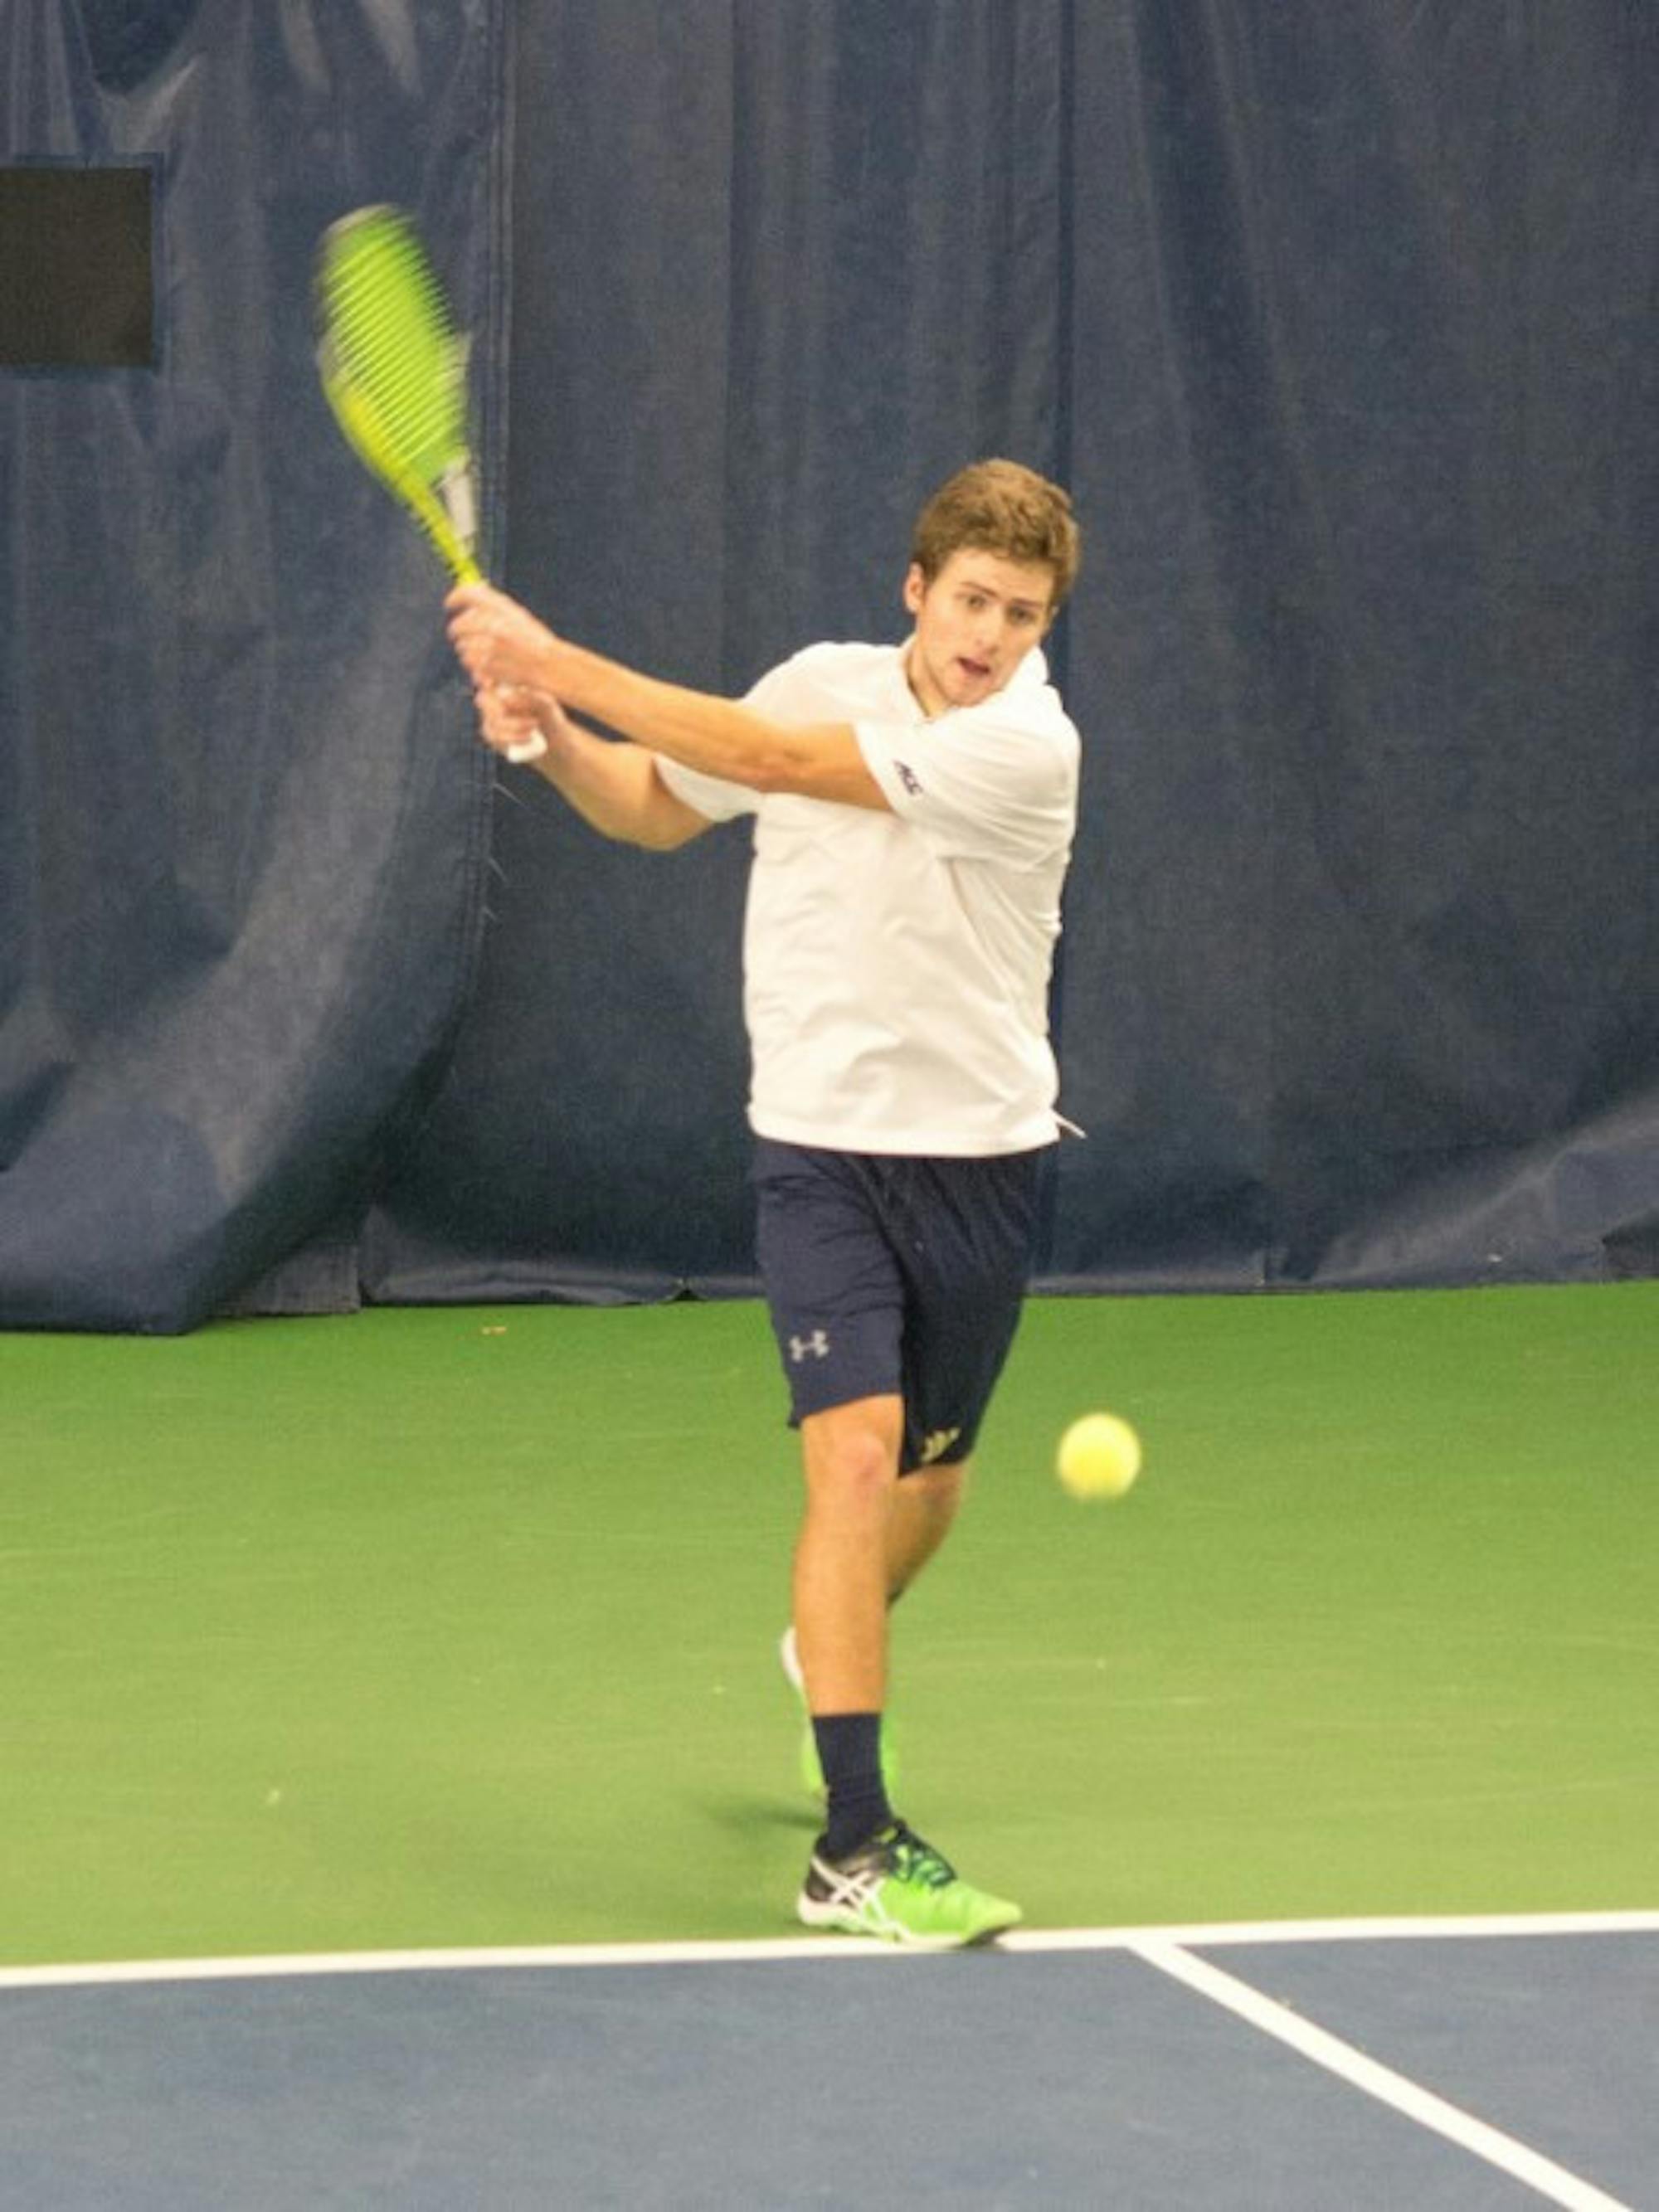 Senior Quentin Monaghan returns a forehand during an Irish 7-0 win over Ball State at Eck Tennis Pavilion on Feb. 7.